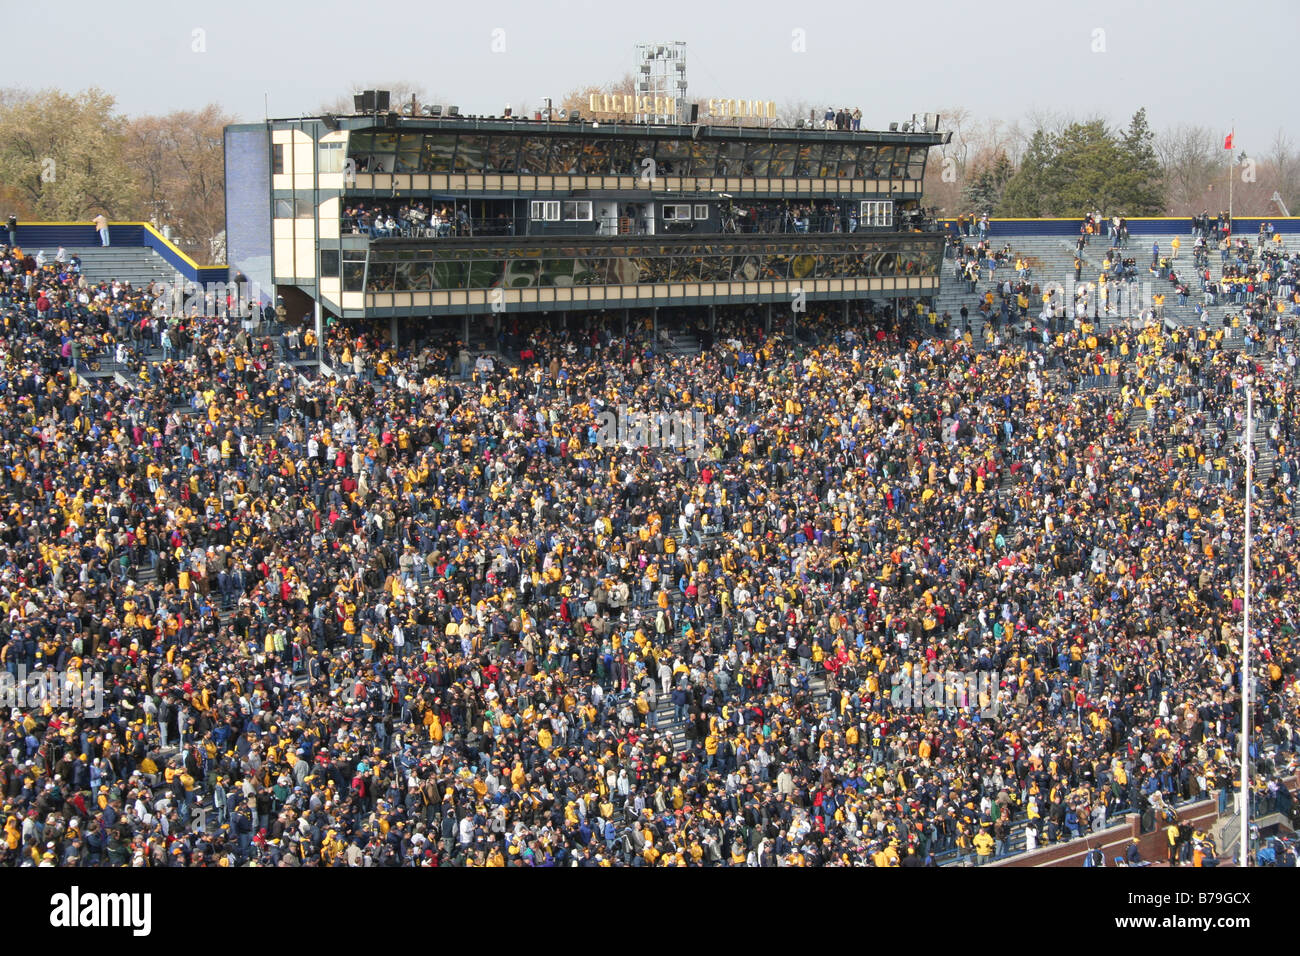 Fans pack the University of Michigan football stadium for a college football game. Stock Photo